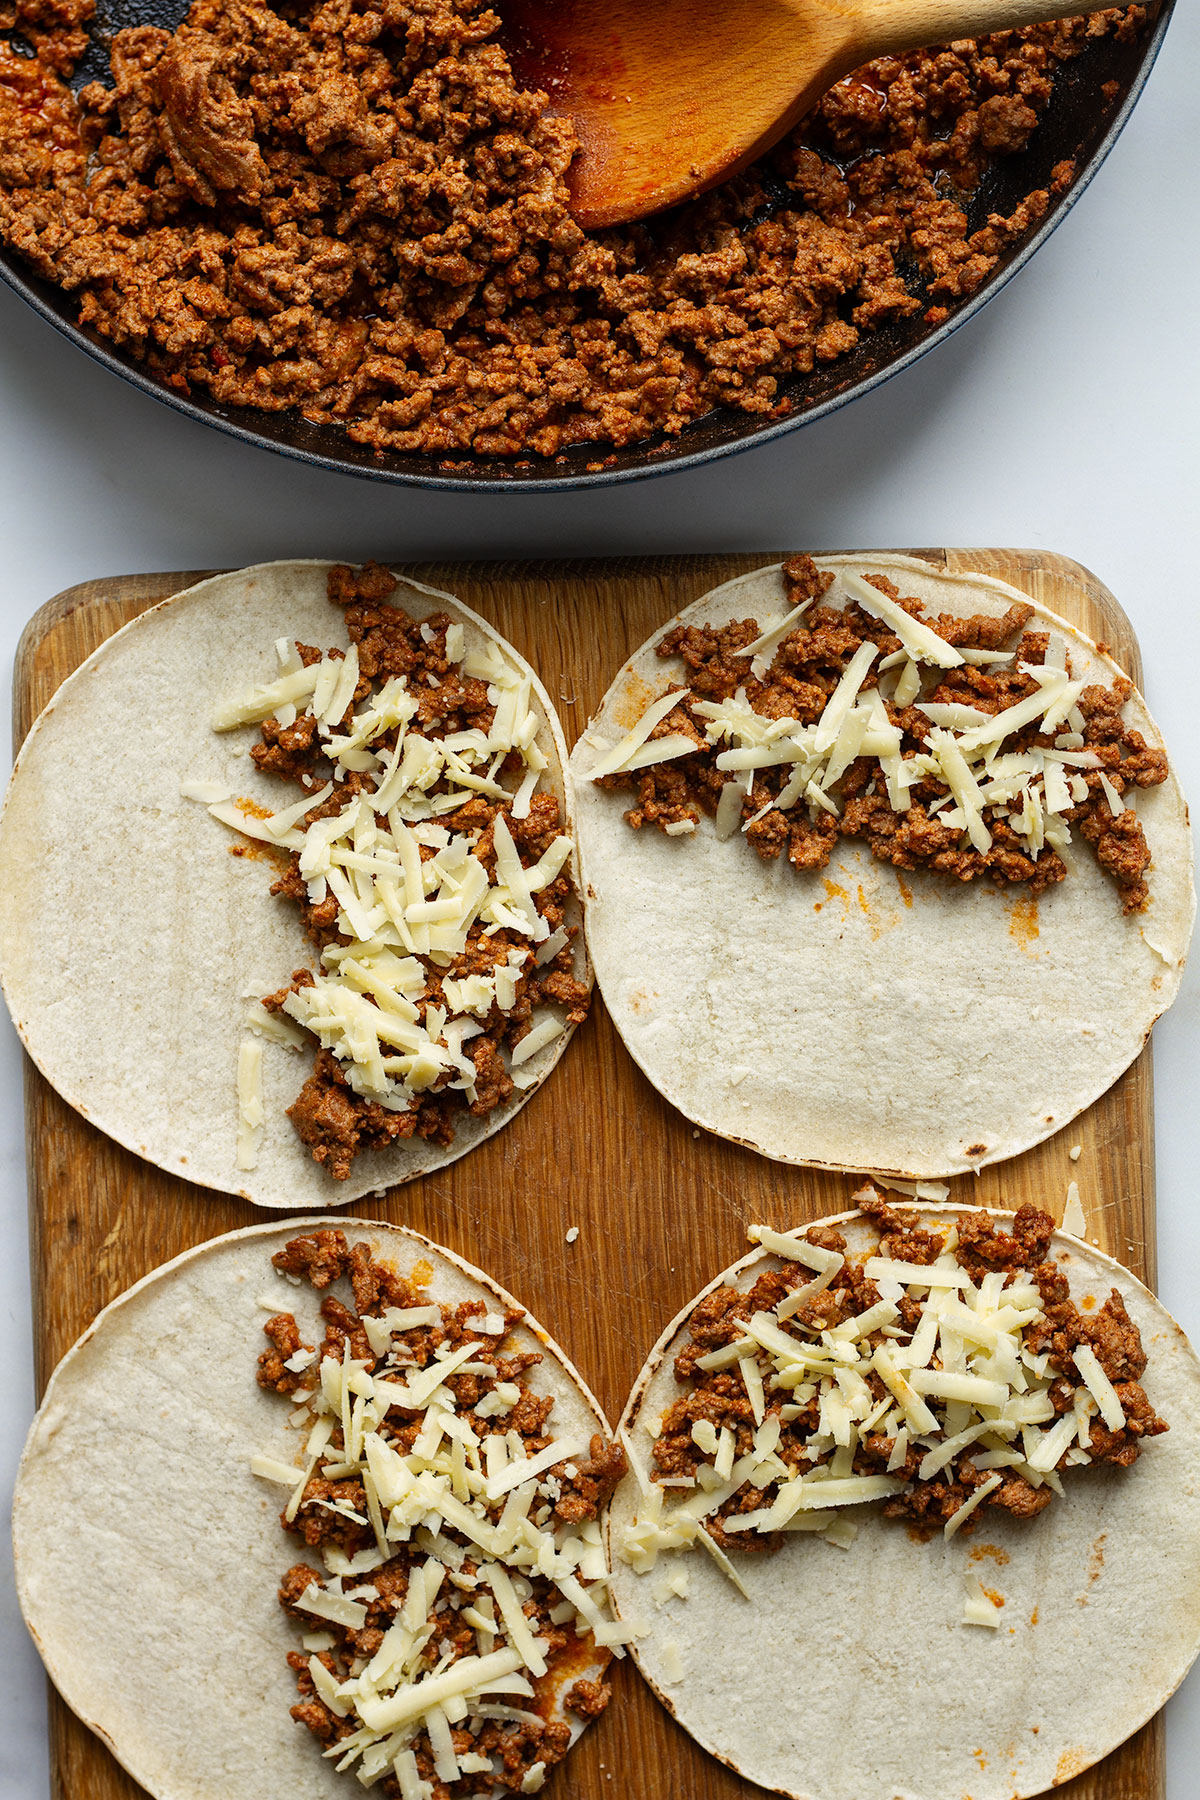 Placing spoonfuls of the beef filling onto each tortilla, and adding a little shredded cheese.